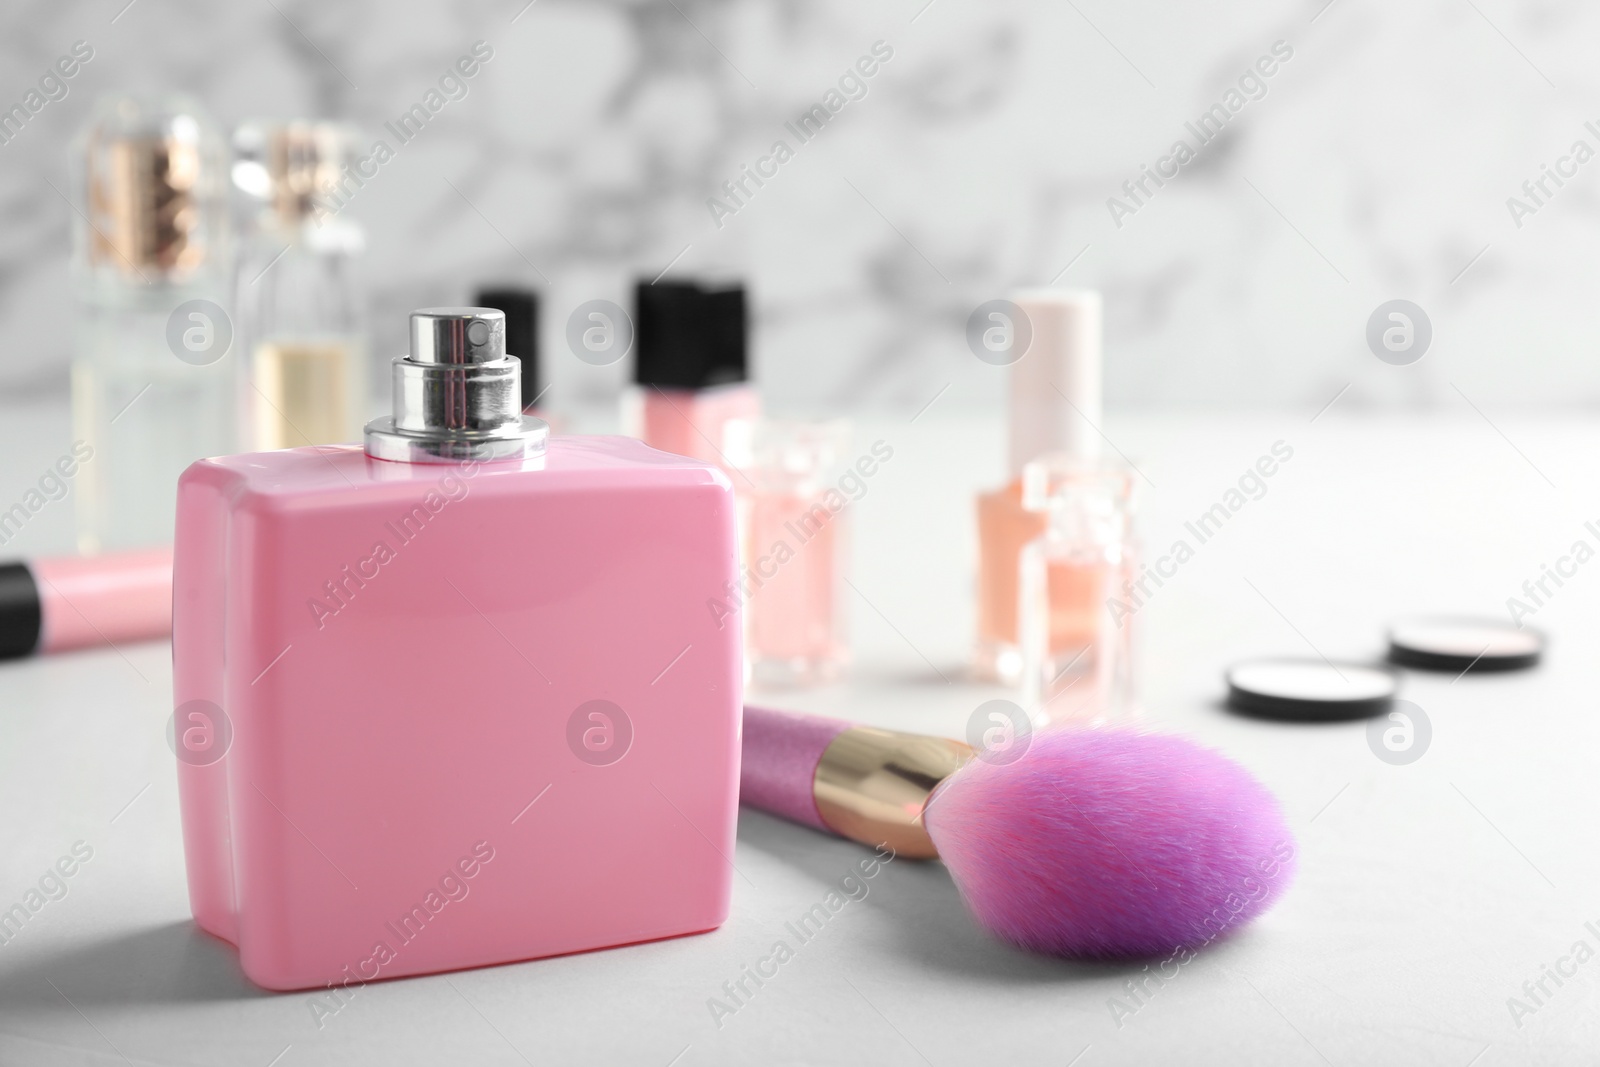 Photo of Bottle of perfume and cosmetic brush on table against marble background. Space for text